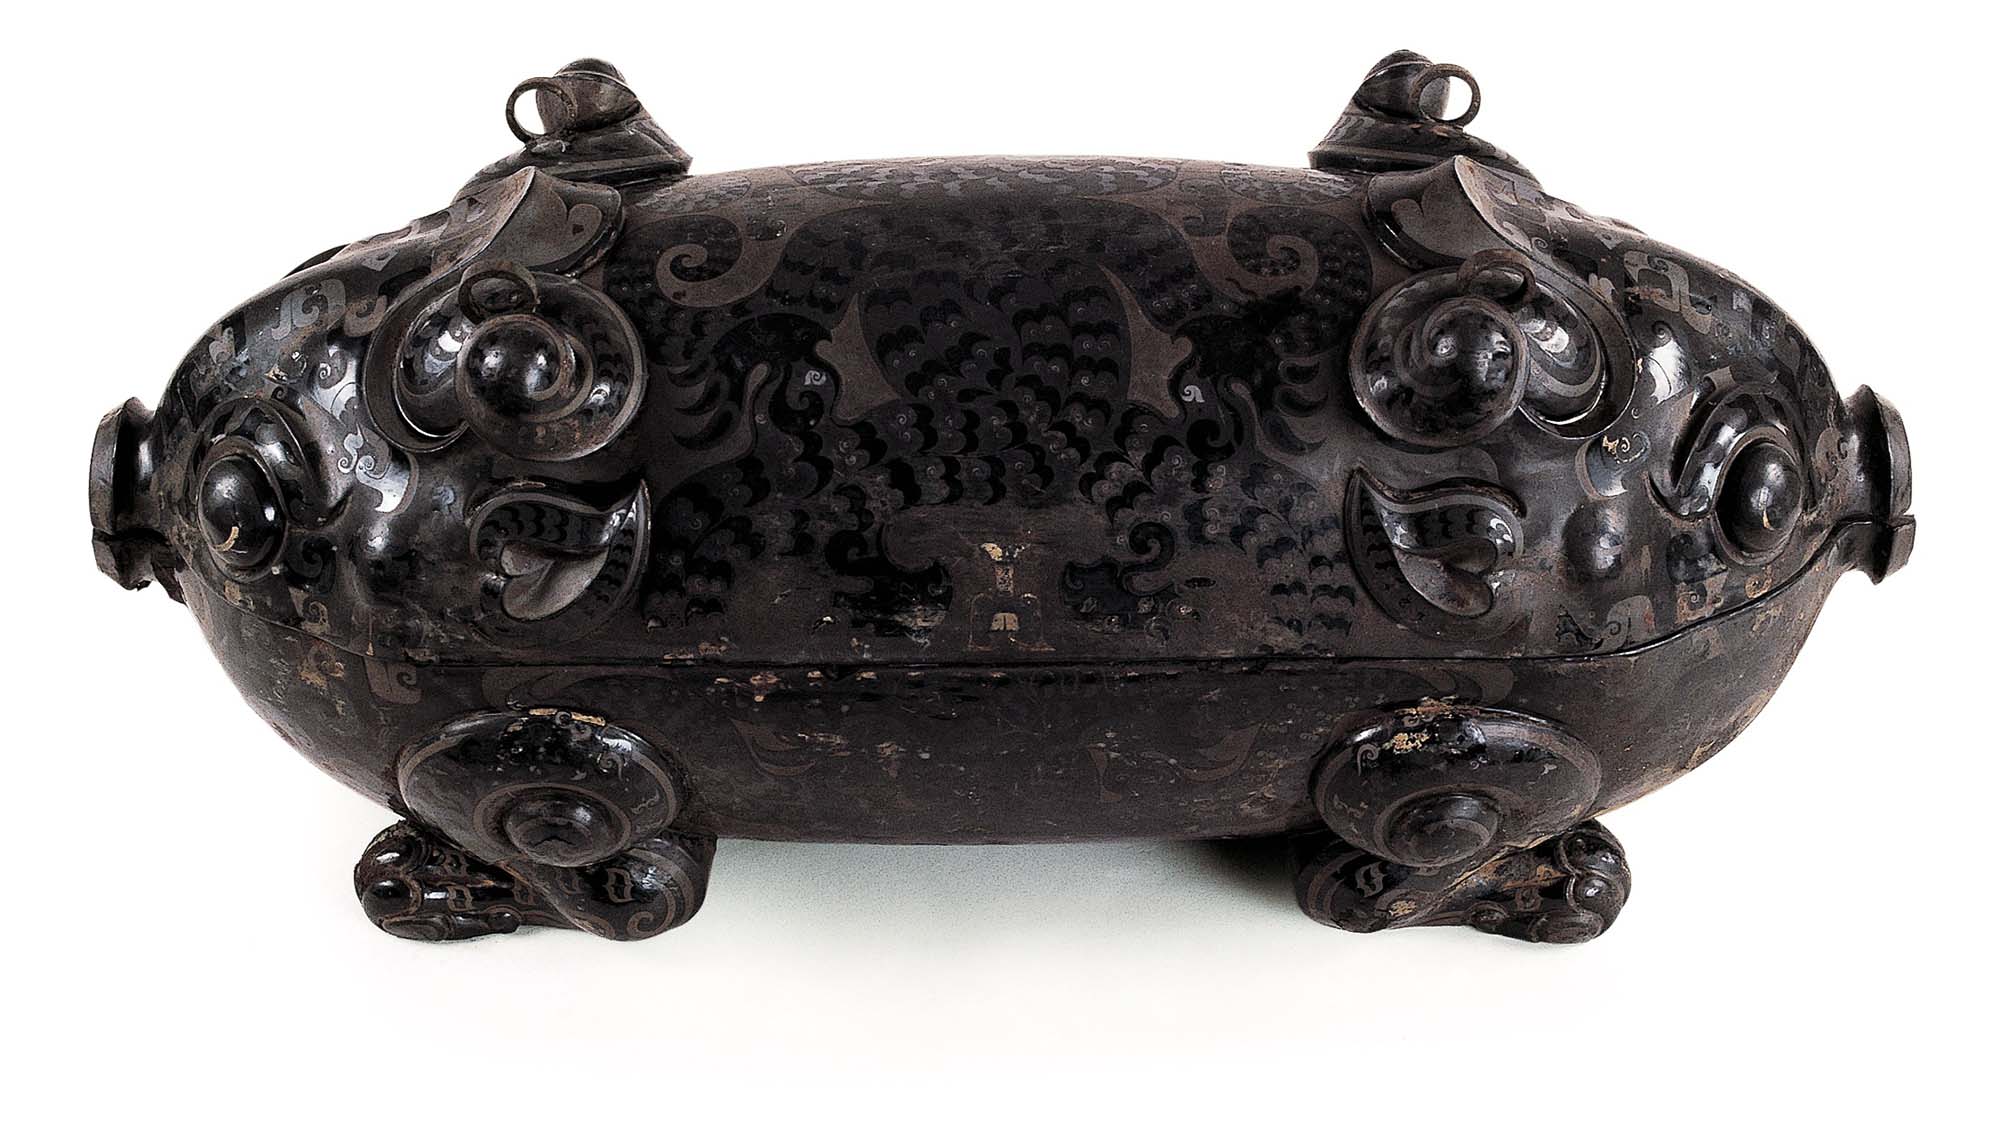 Lidded box in the shape of conjoined pigs, made of laquered wood.